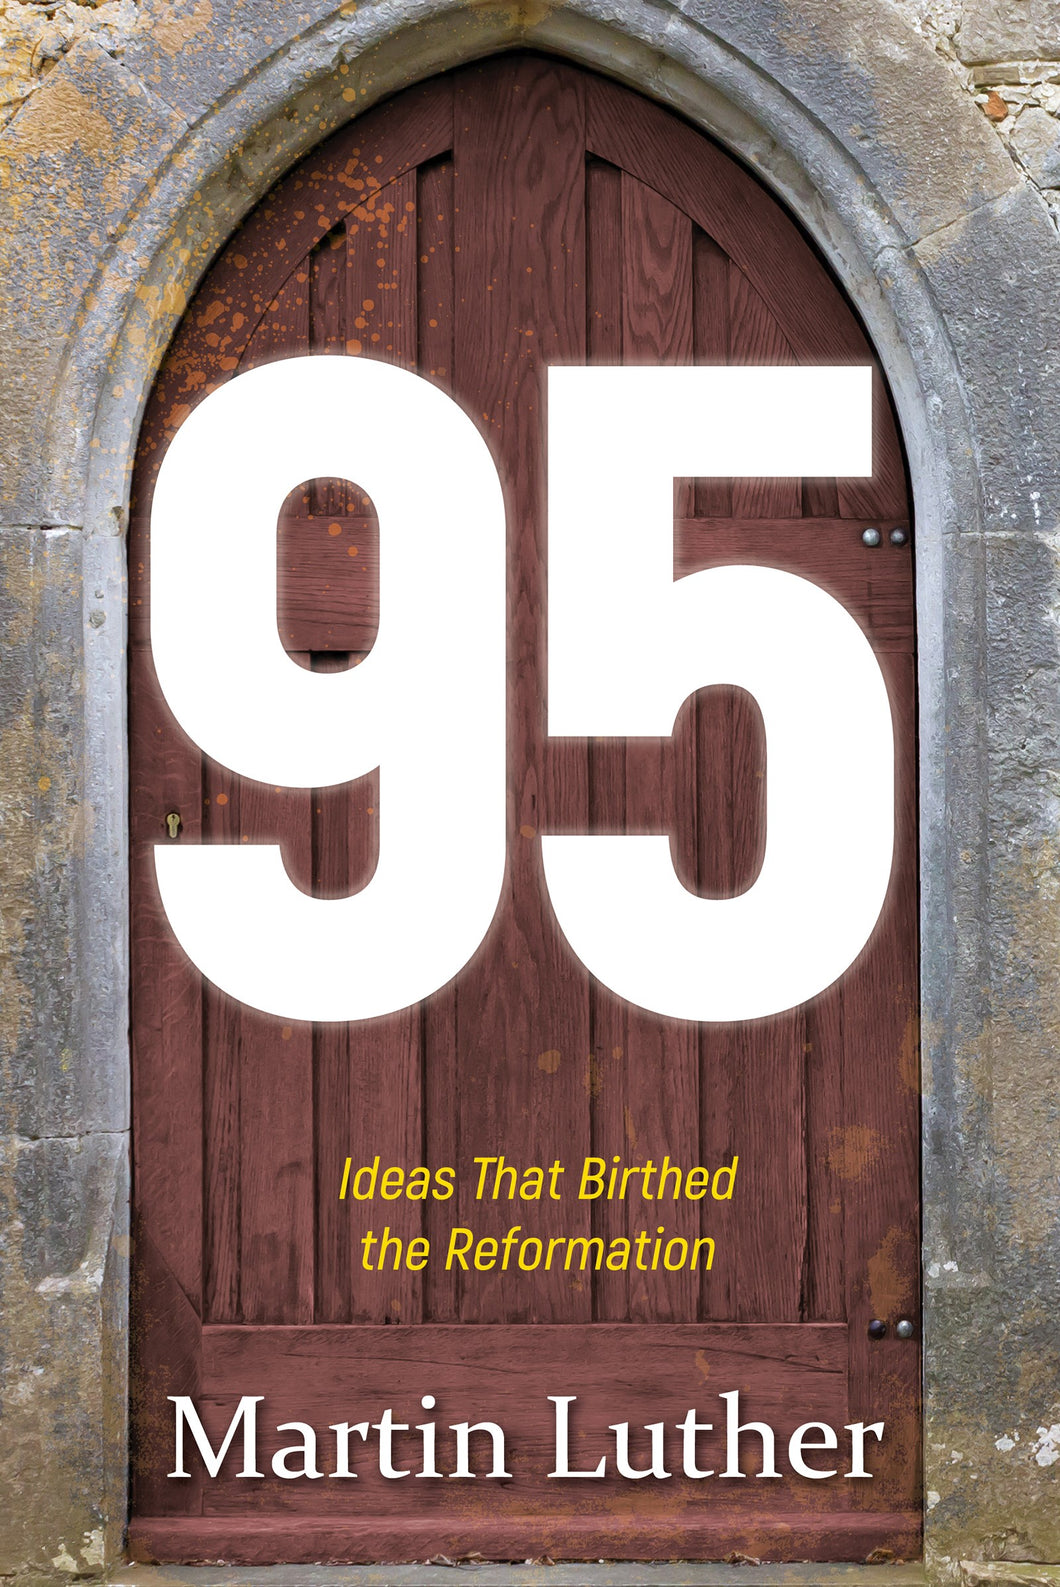 95: The Ideas That Birthed The Reformation